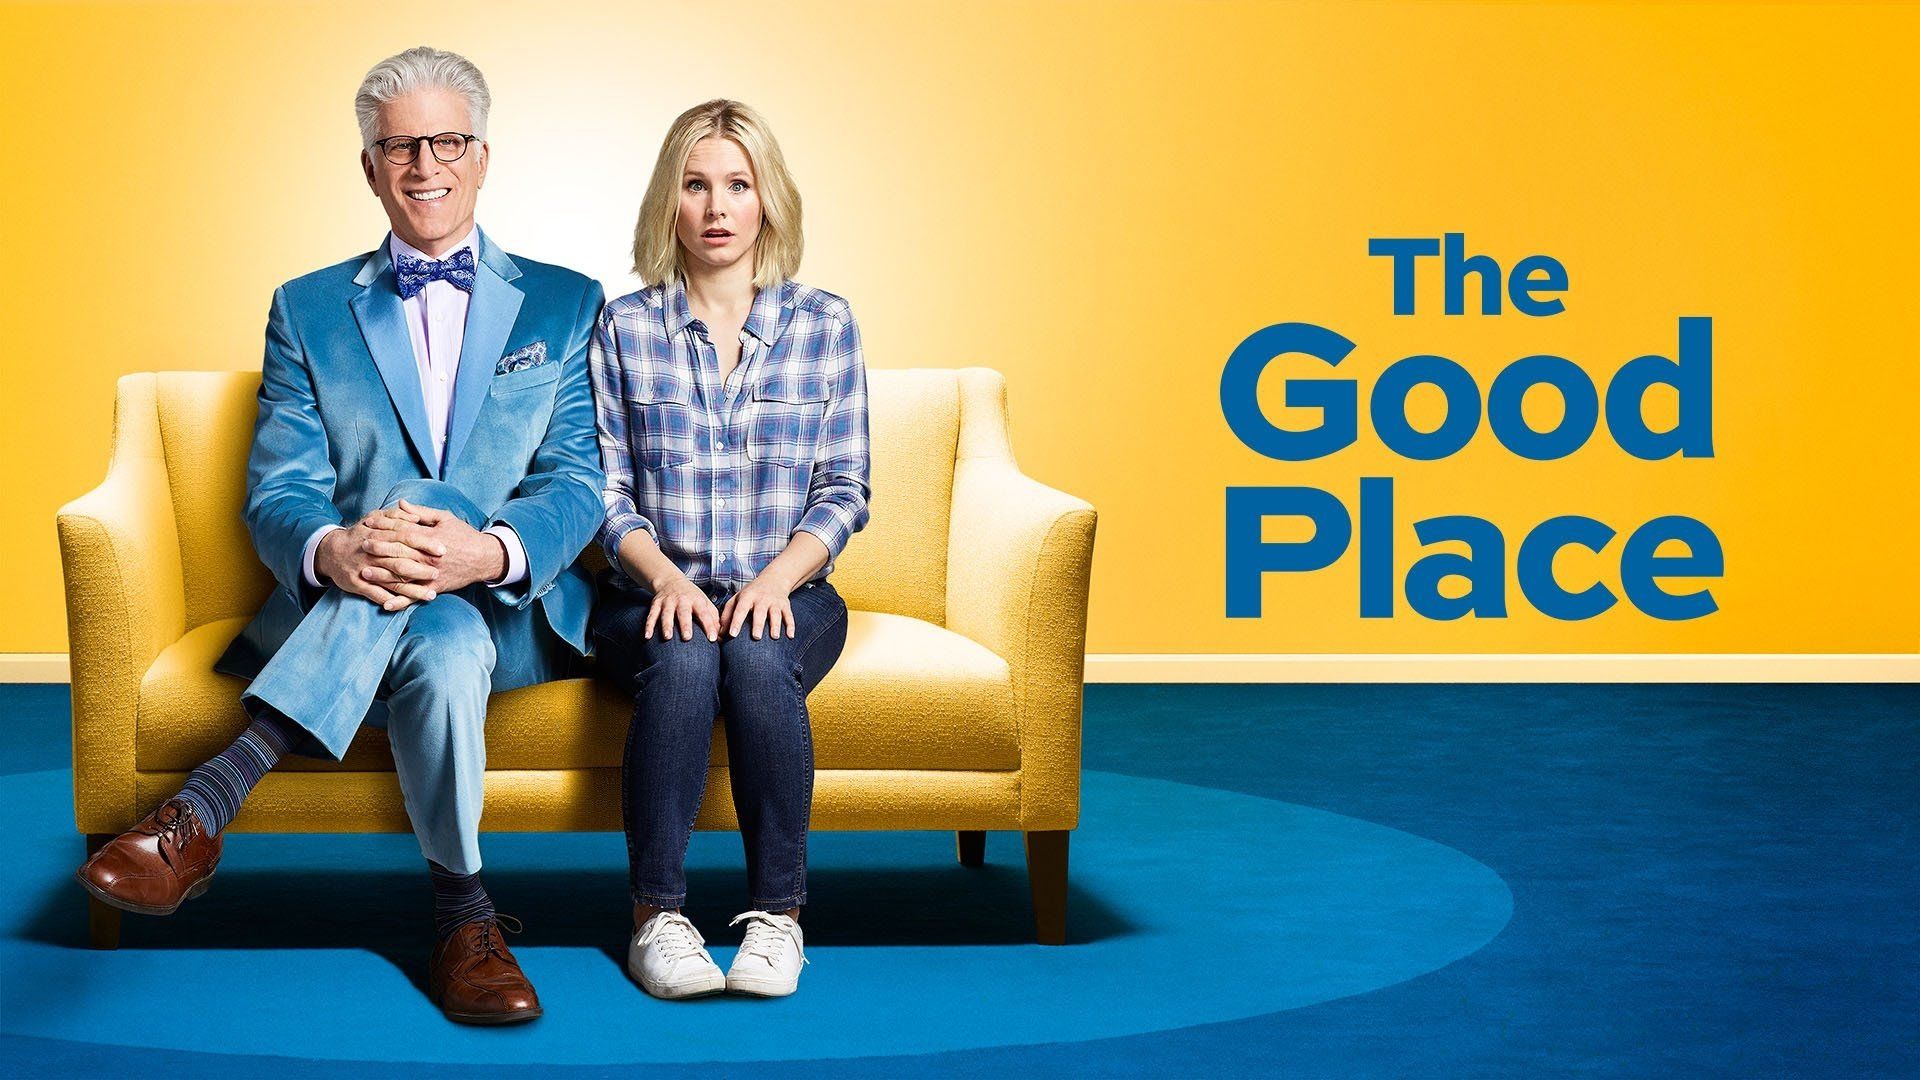 1920x1080 The Good Place Hd Wallpaper Background Image 1920x1080